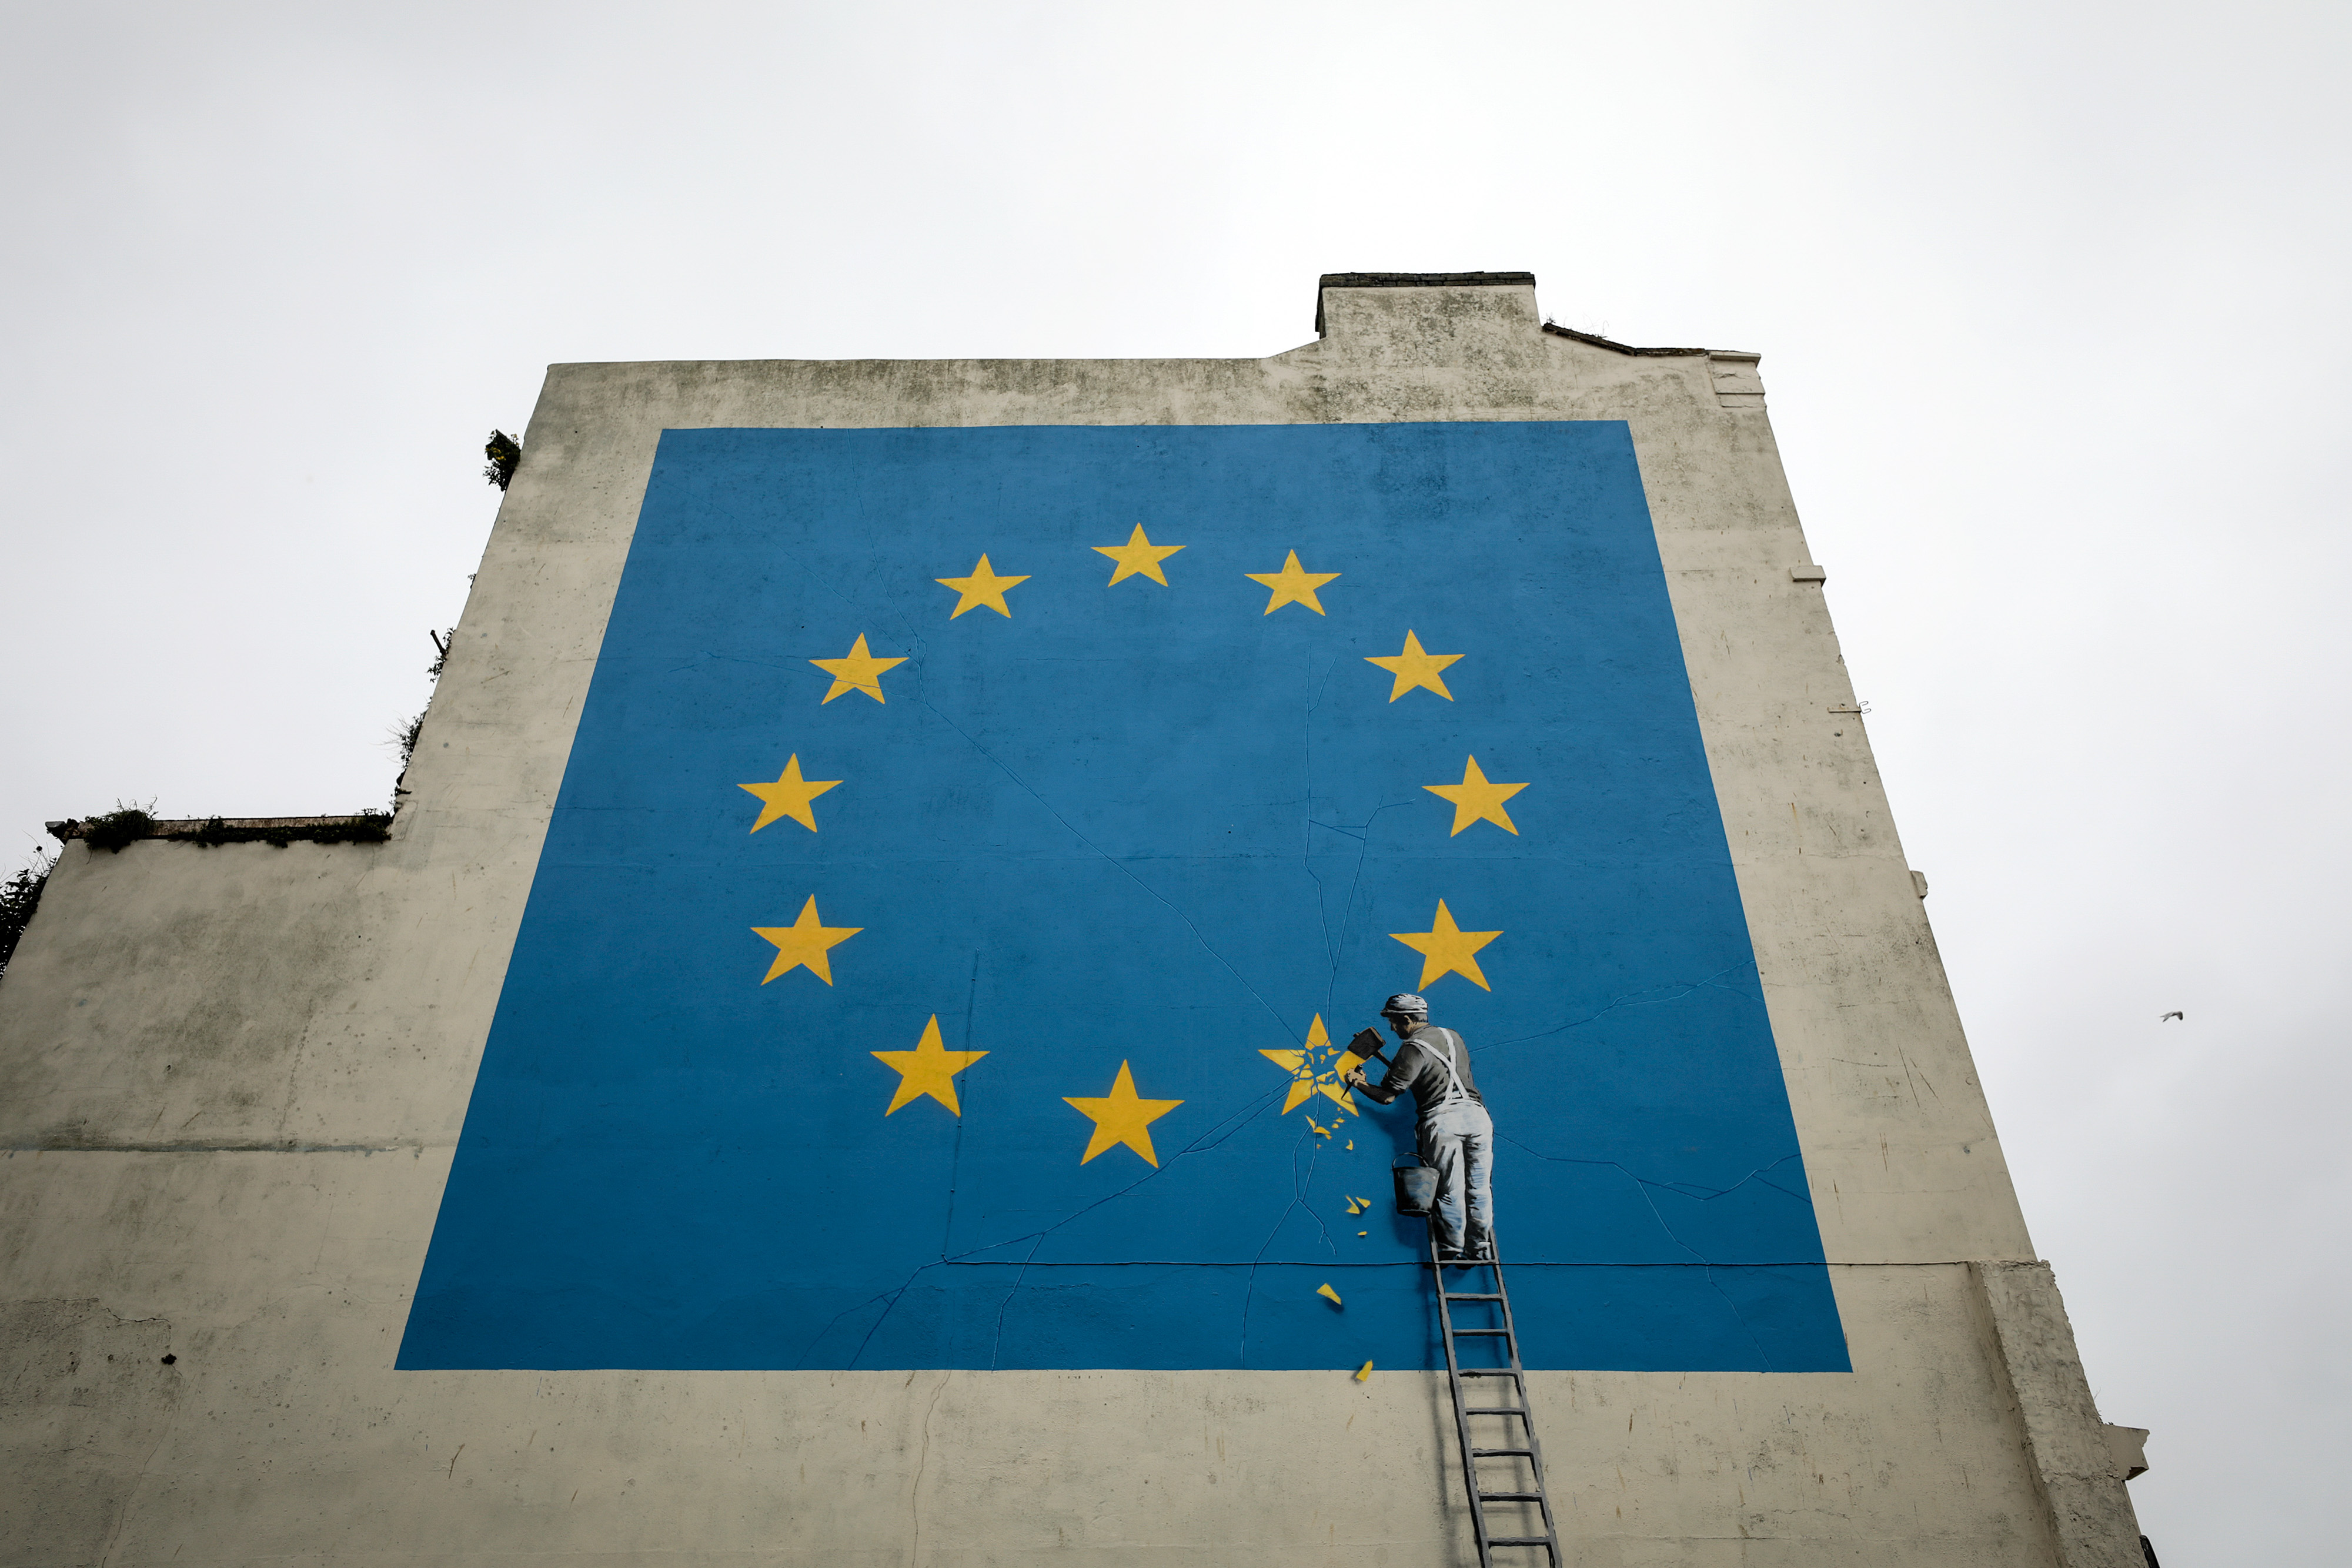 A mural depicting a European Union (EU) flag being chiseled by a workman sits on the side of a disused building near the ferry terminal in Dover, U.K., on Monday, May 8, 2017. (Simon Dawson—Bloomberg/Getty Images)